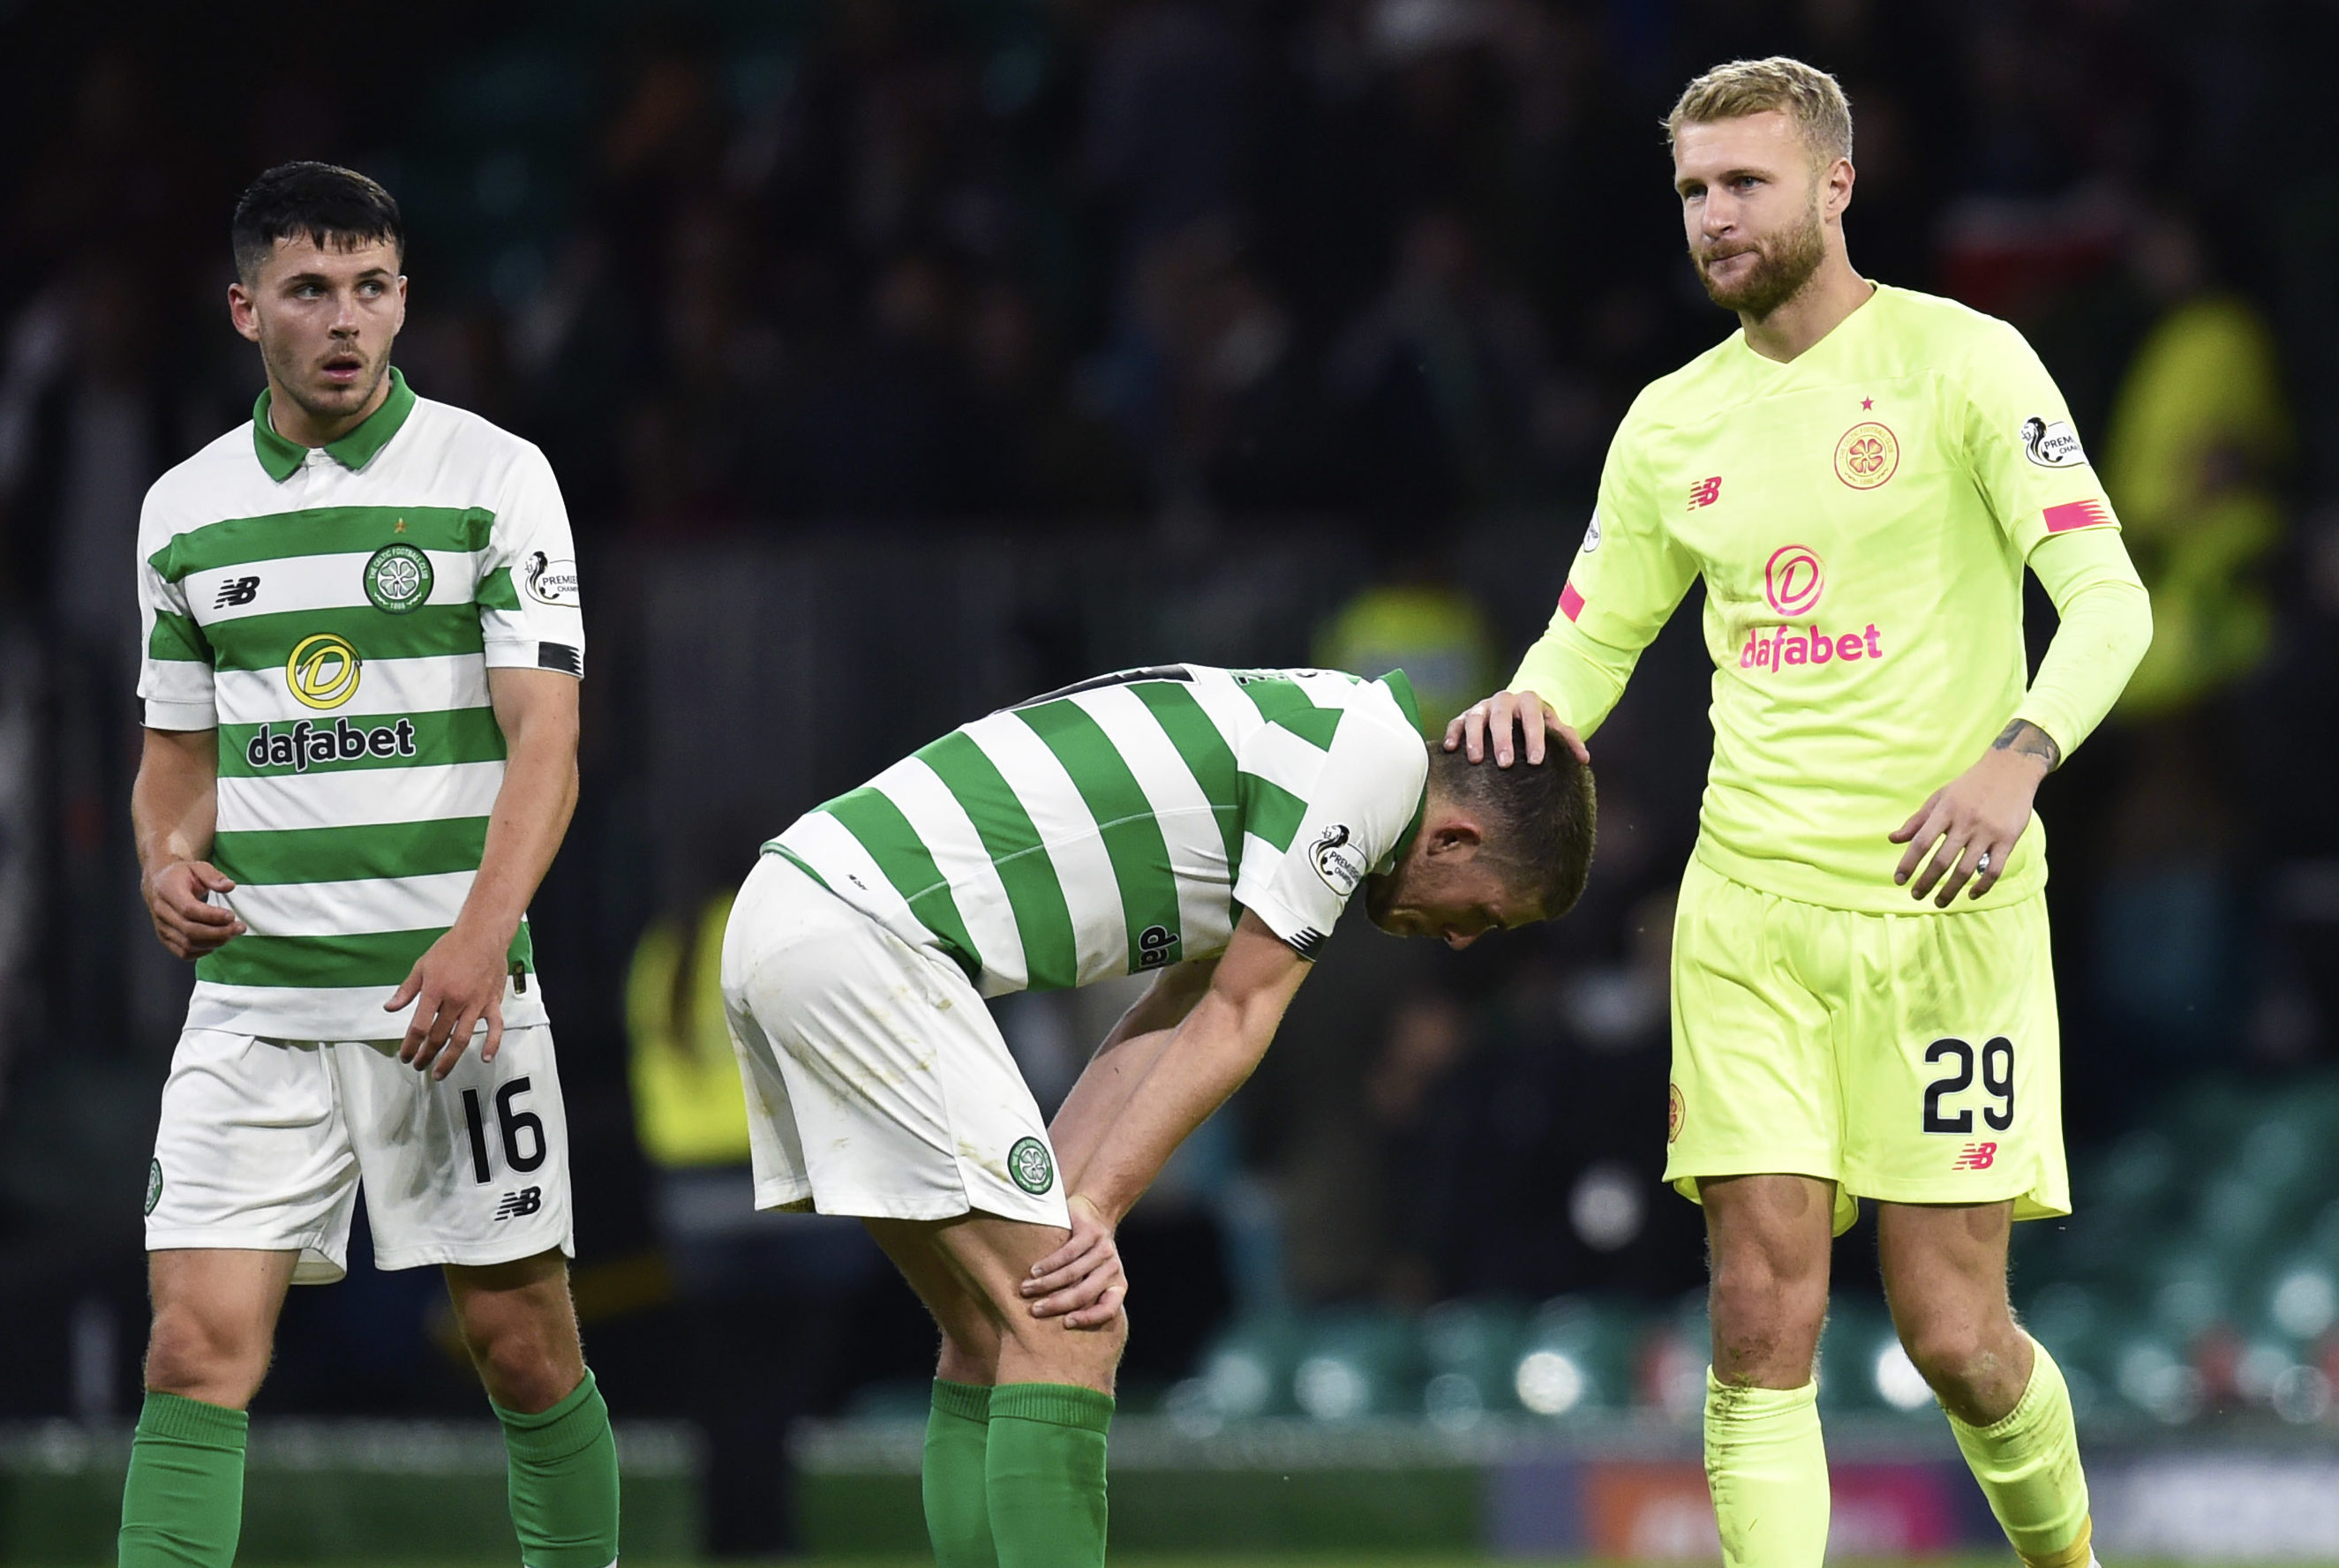 Celtic's Lewis Morgan, Ryan Christie and Scott Bain are left dejected at full-time